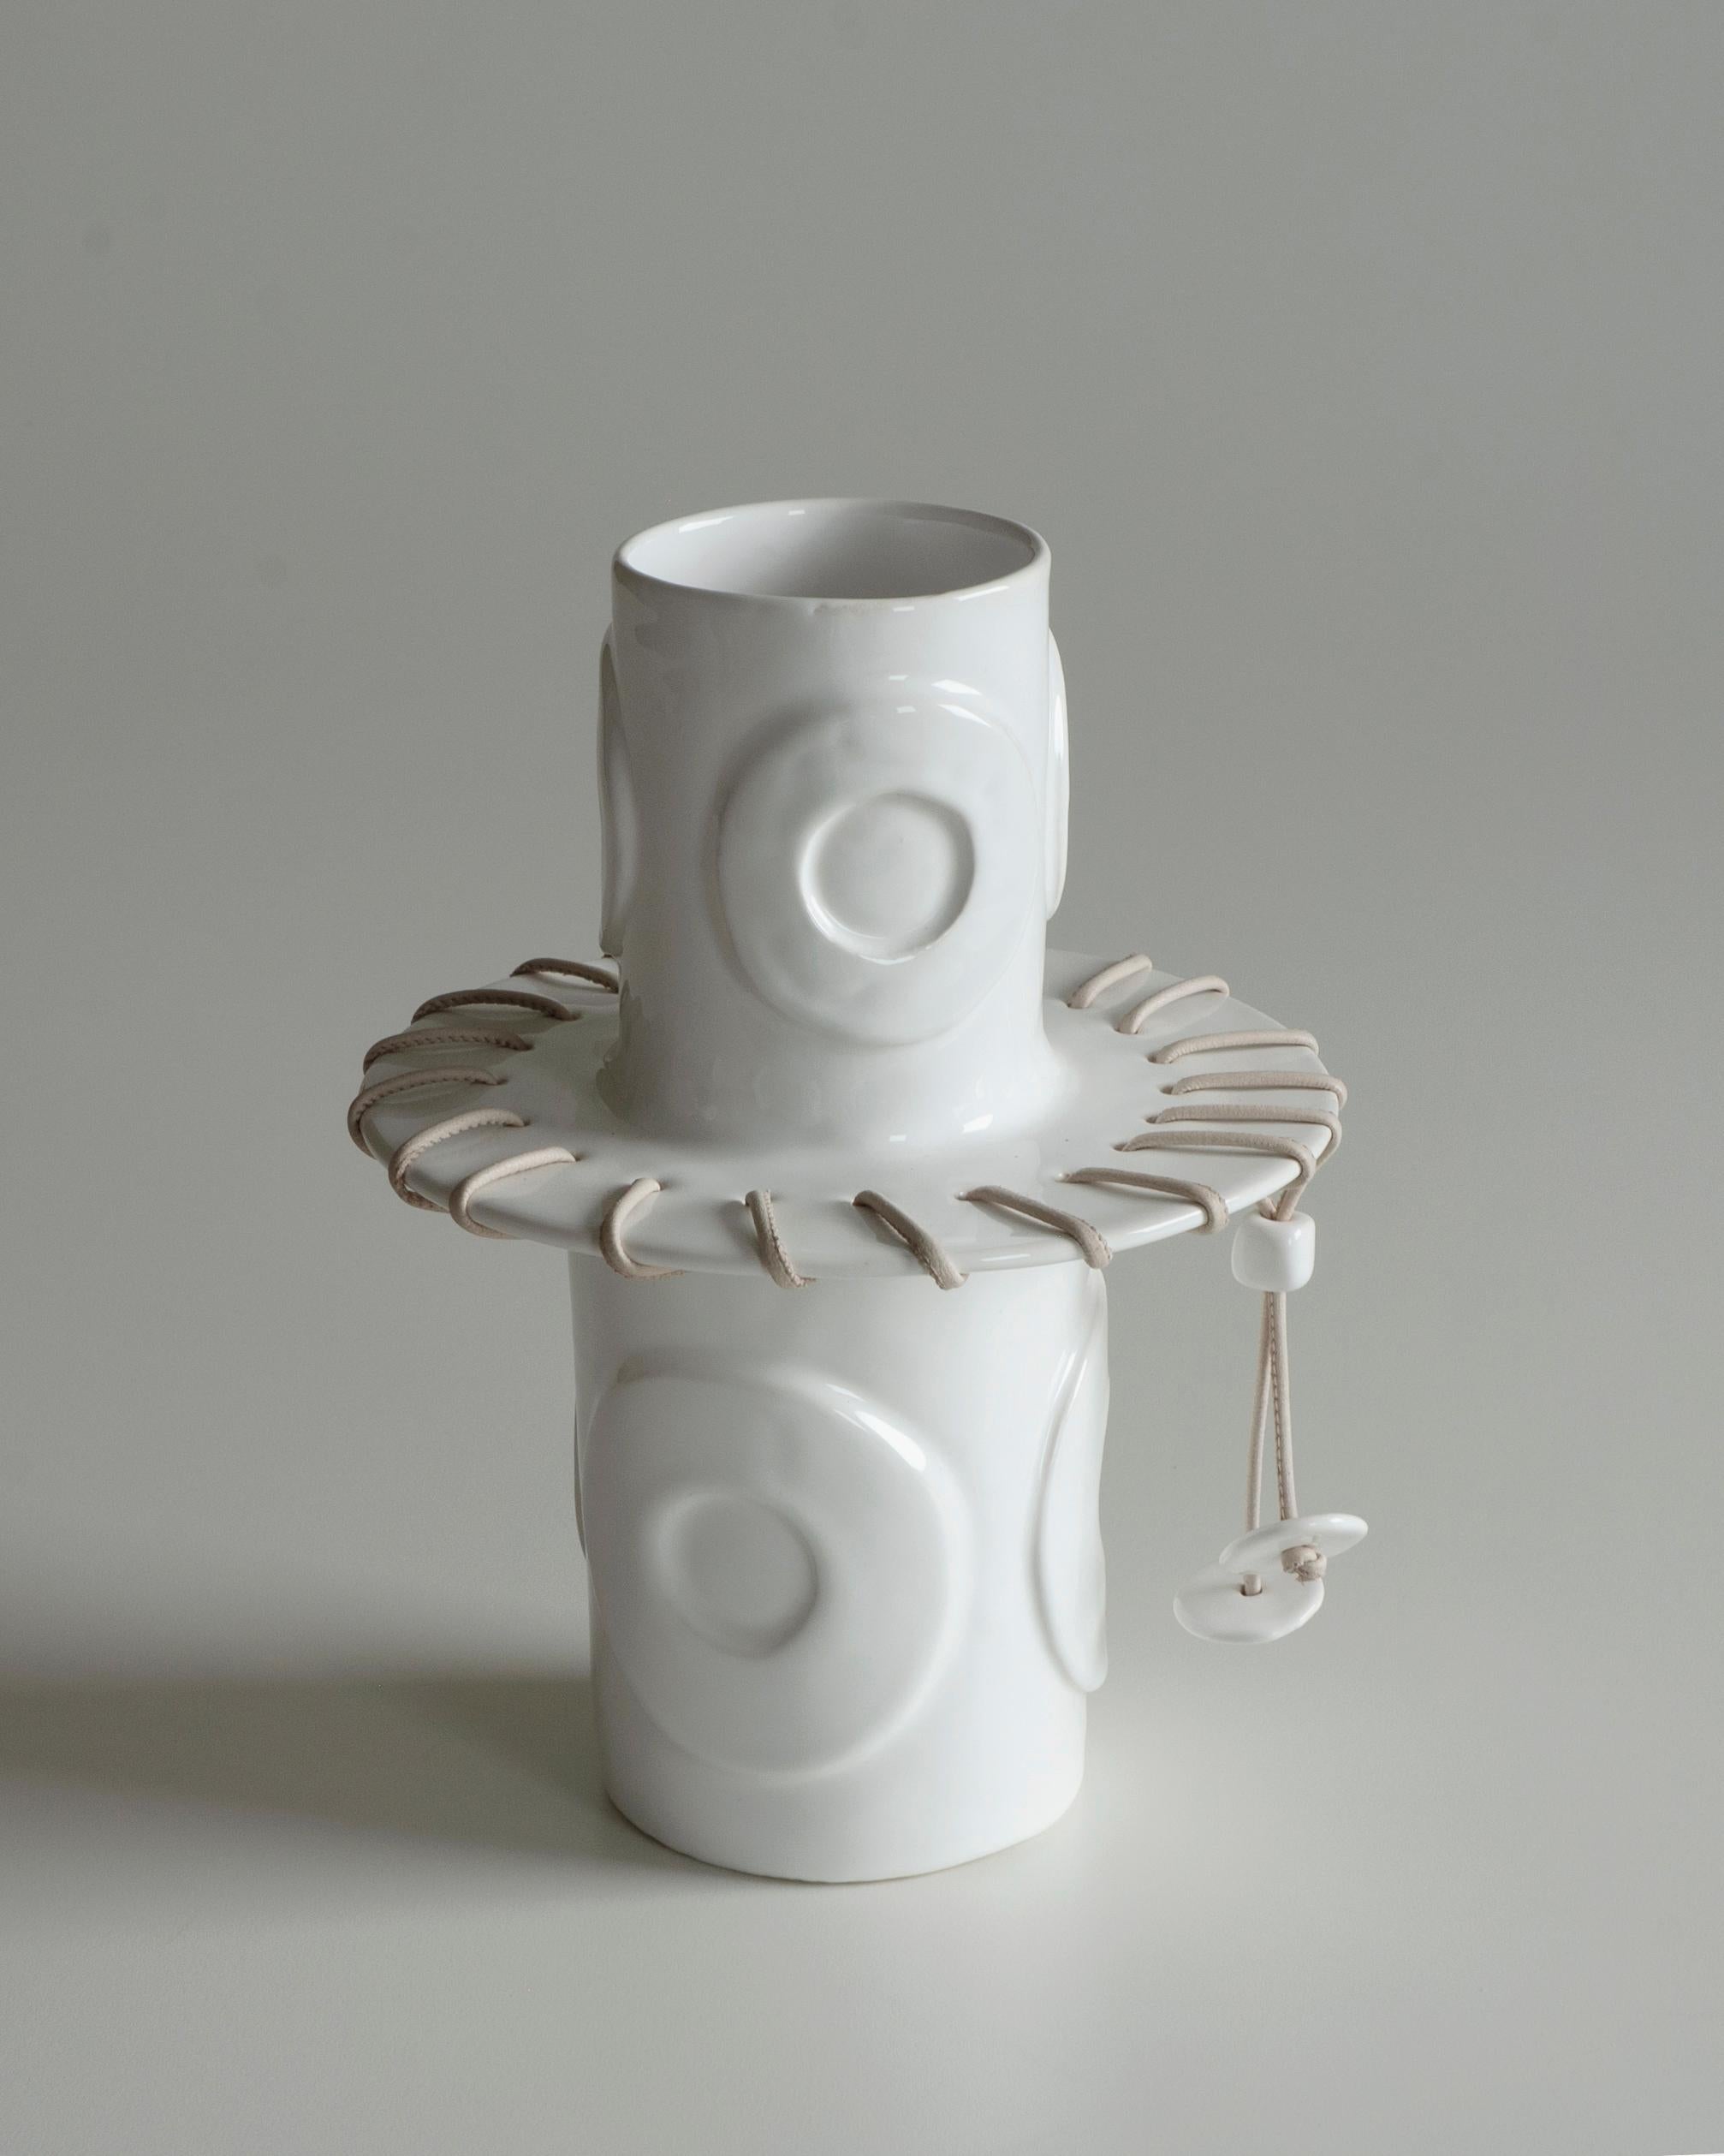 White ceramic vase with decorative relief details. La smaltatura a immersione  blends harmoniously with the decorative details, creating a contrast that makes it unique. The leather drawstring detail represents the seam,  elemento ricorrente nel